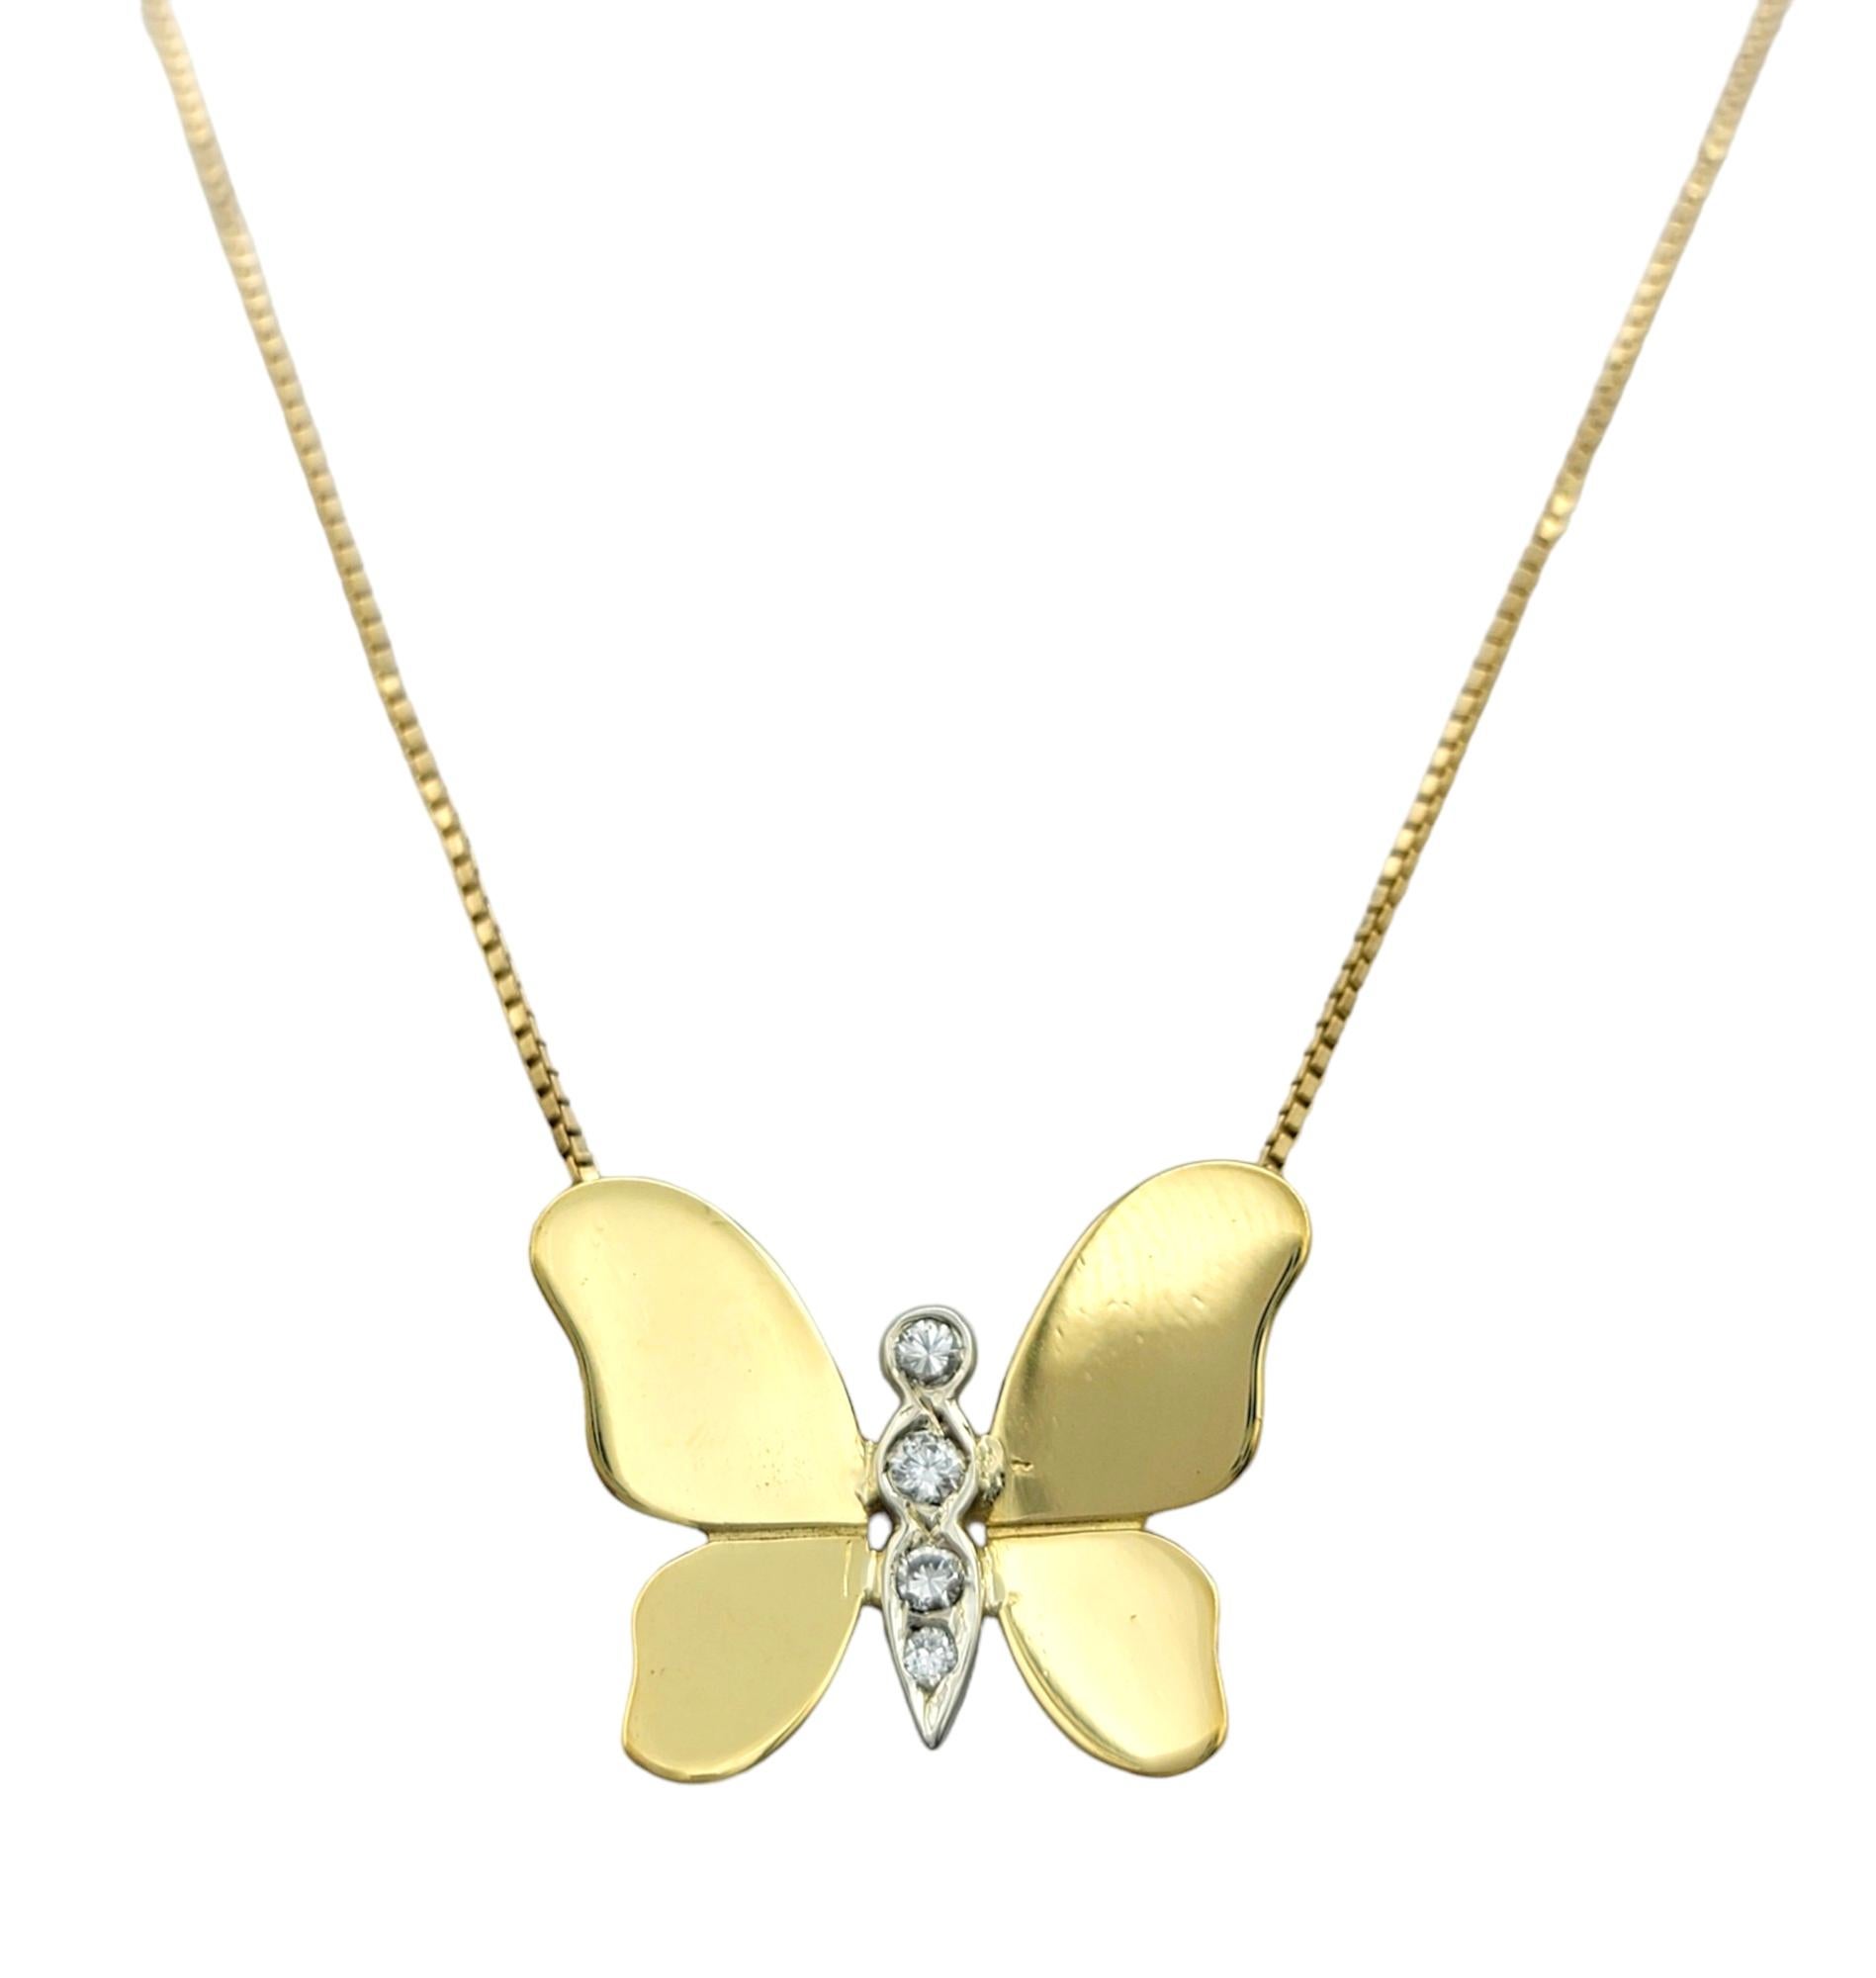 This stunning butterfly necklace, set in 18 karat yellow gold, is a graceful work of art. Delicately crafted, it captures the essence of a fluttering butterfly with its simple stationary design. 

The shimmering diamonds adorning the body of the